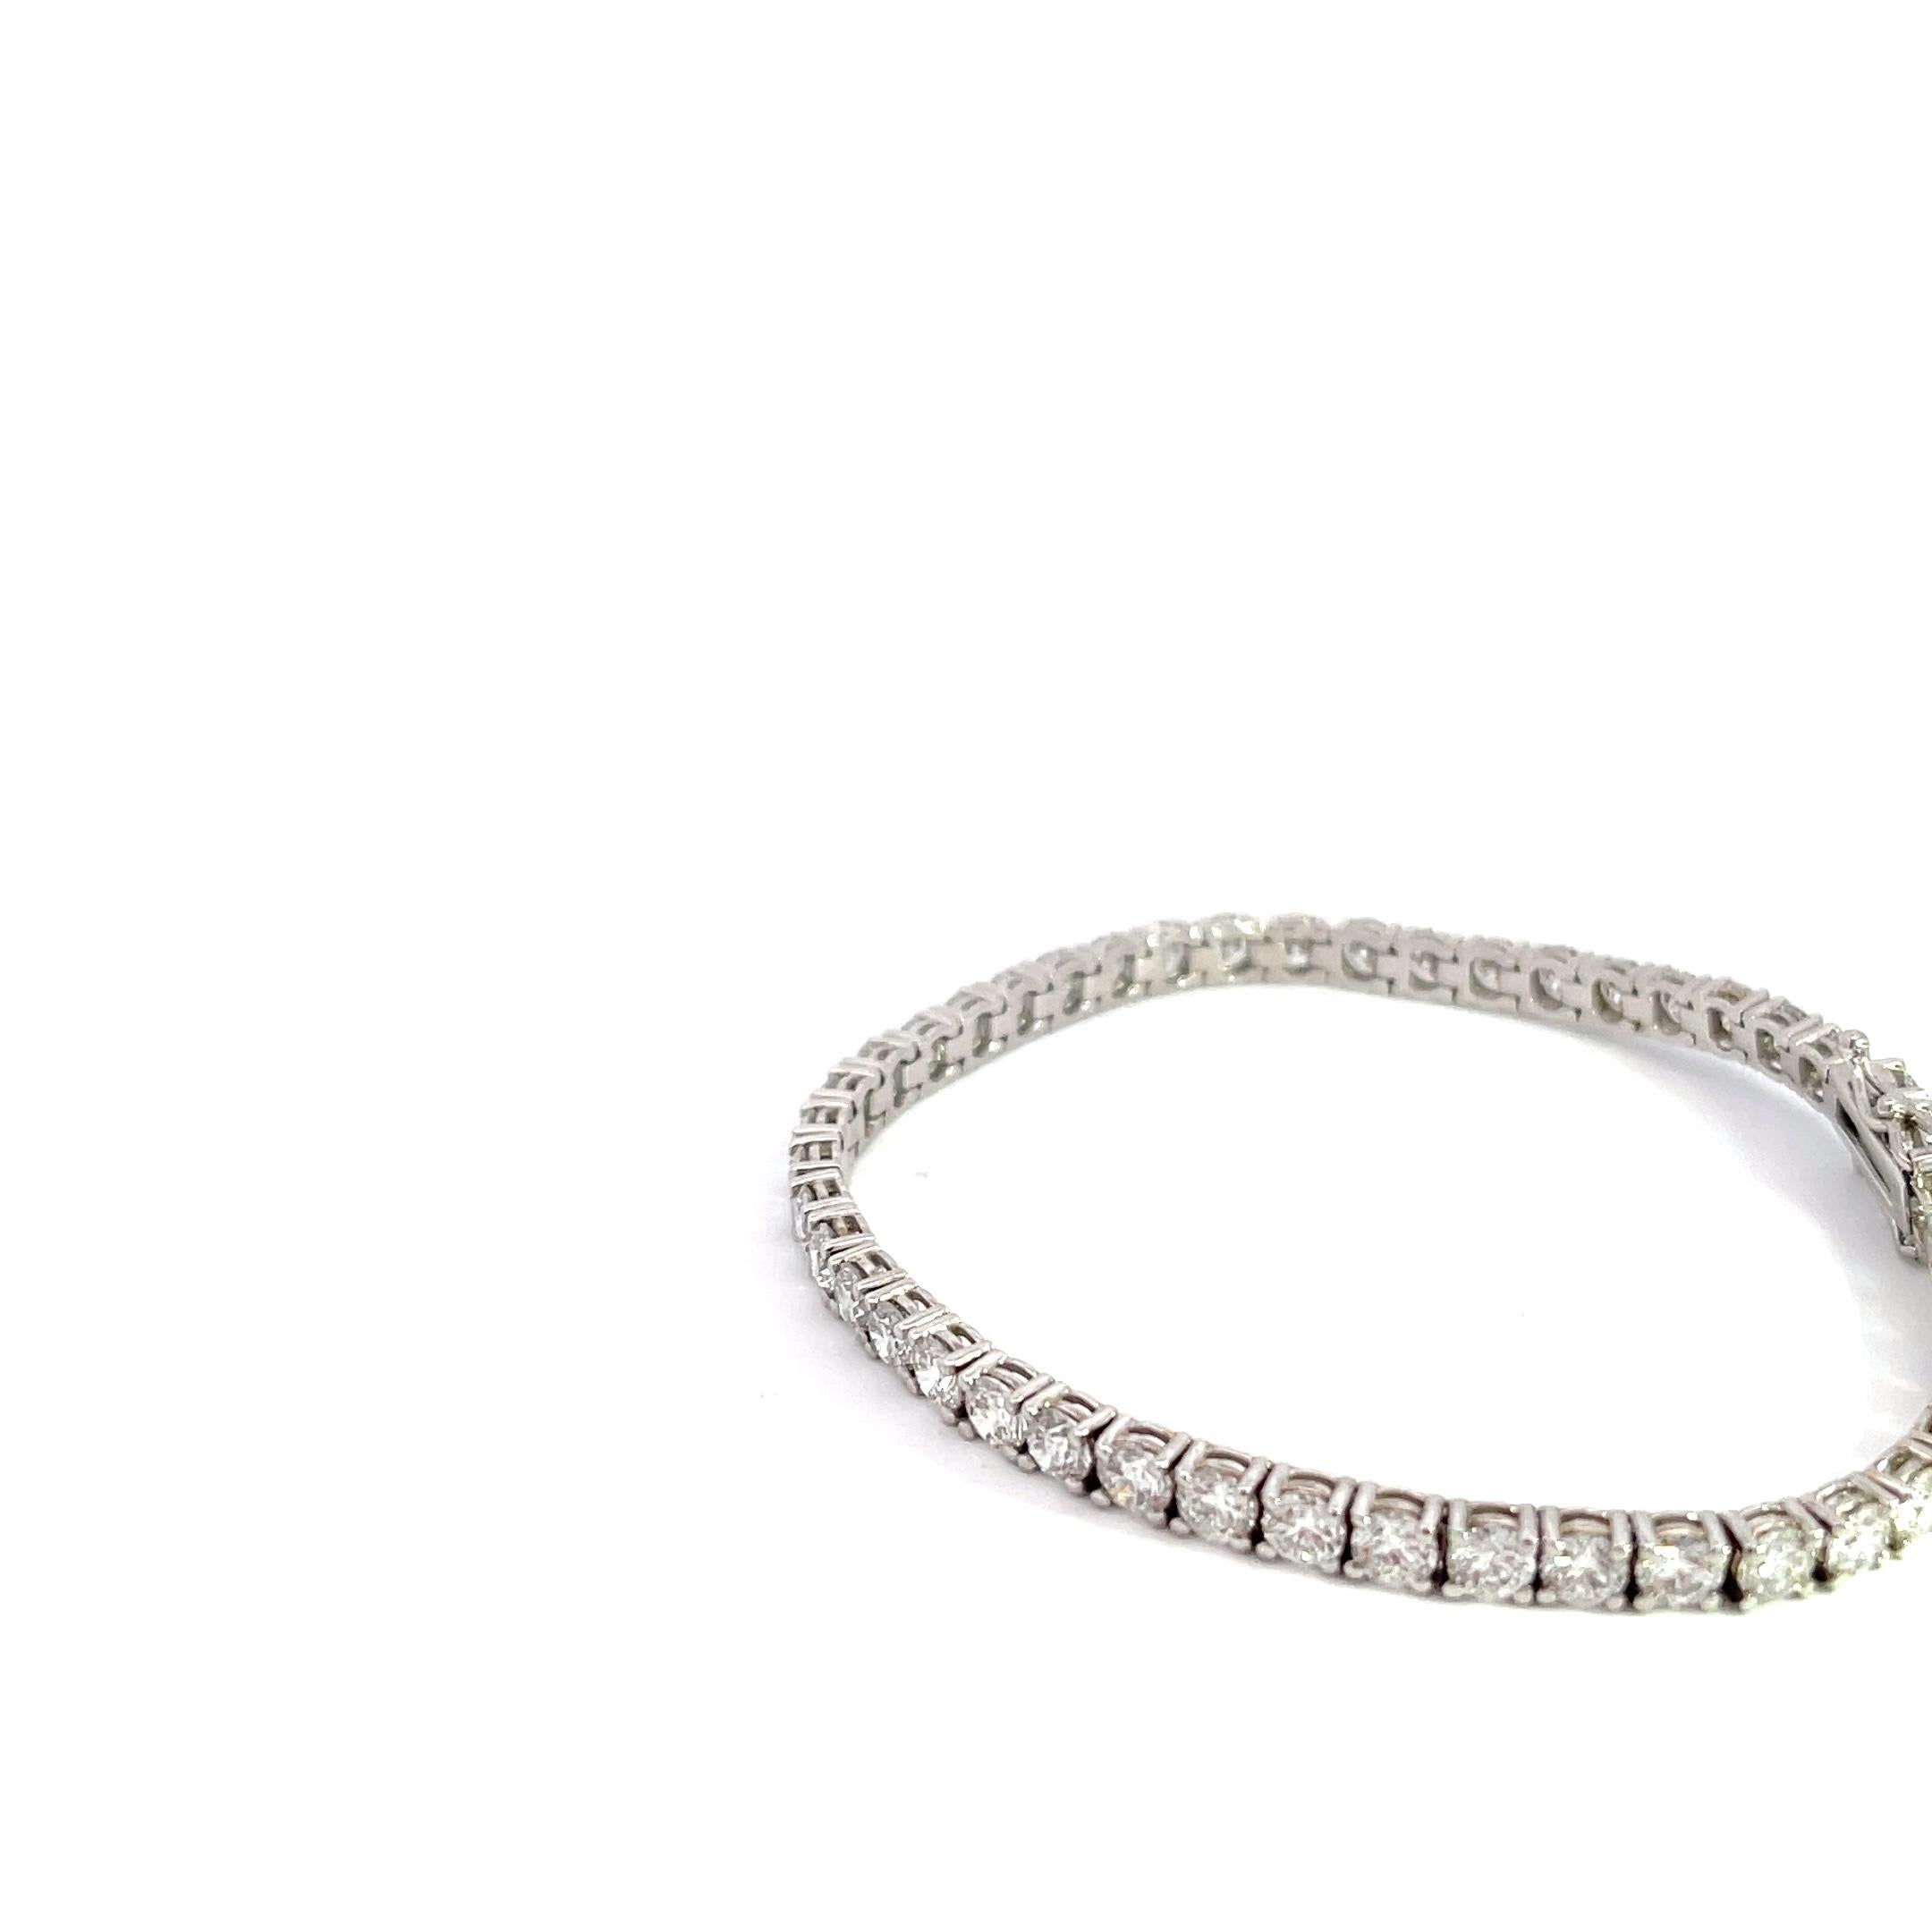 Introducing the exquisite 14k White Gold 12 5/8ctw Diamond Tennis Bracelet, a true symbol of timeless elegance and sophistication. This dazzling masterpiece is a must-have for those seeking to make a stunning statement. Crafted with meticulous